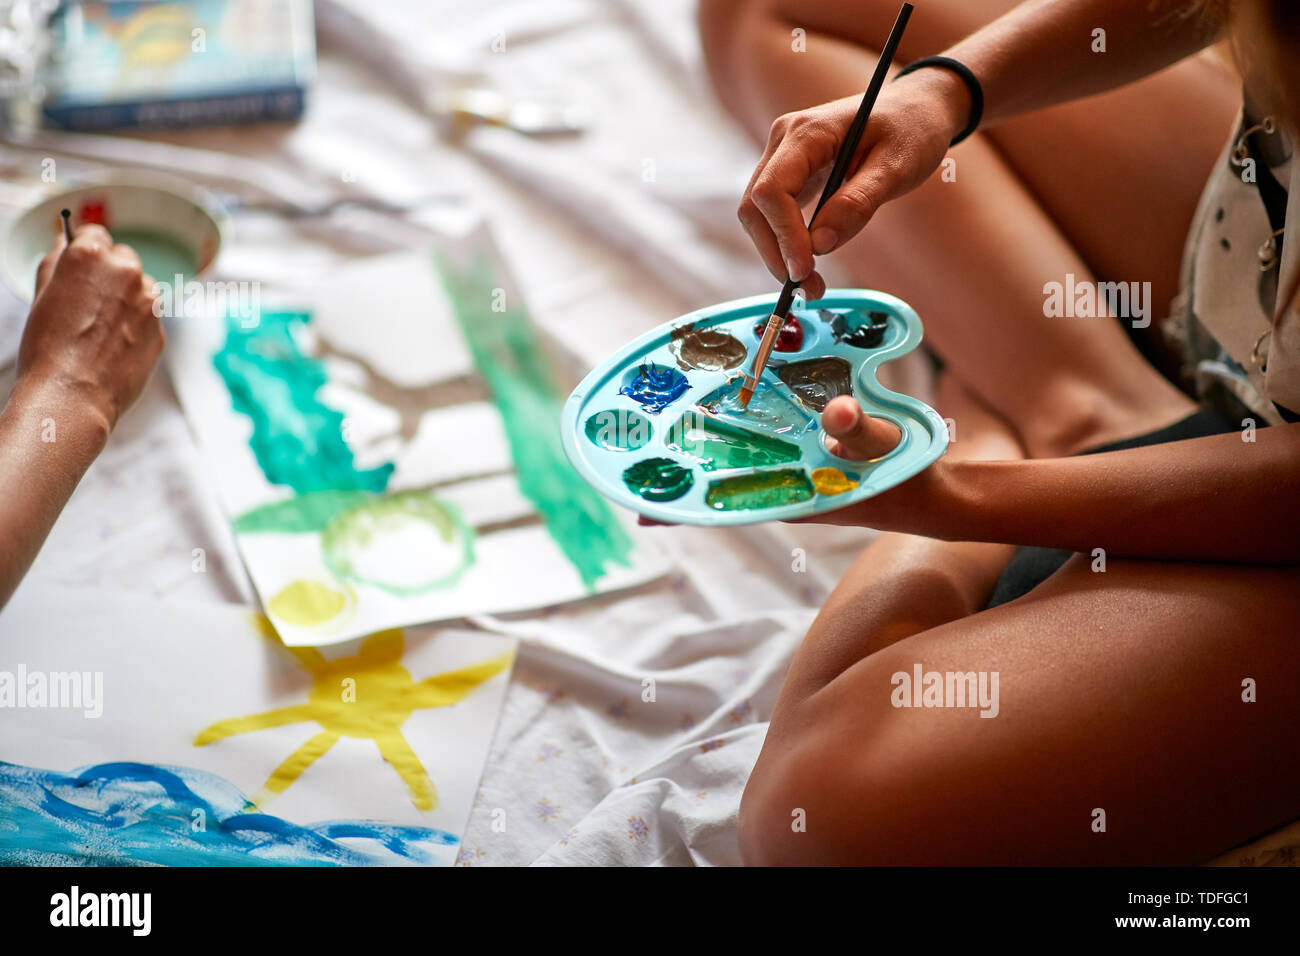 Girl holding palette with paints and brush, concept Stock Photo